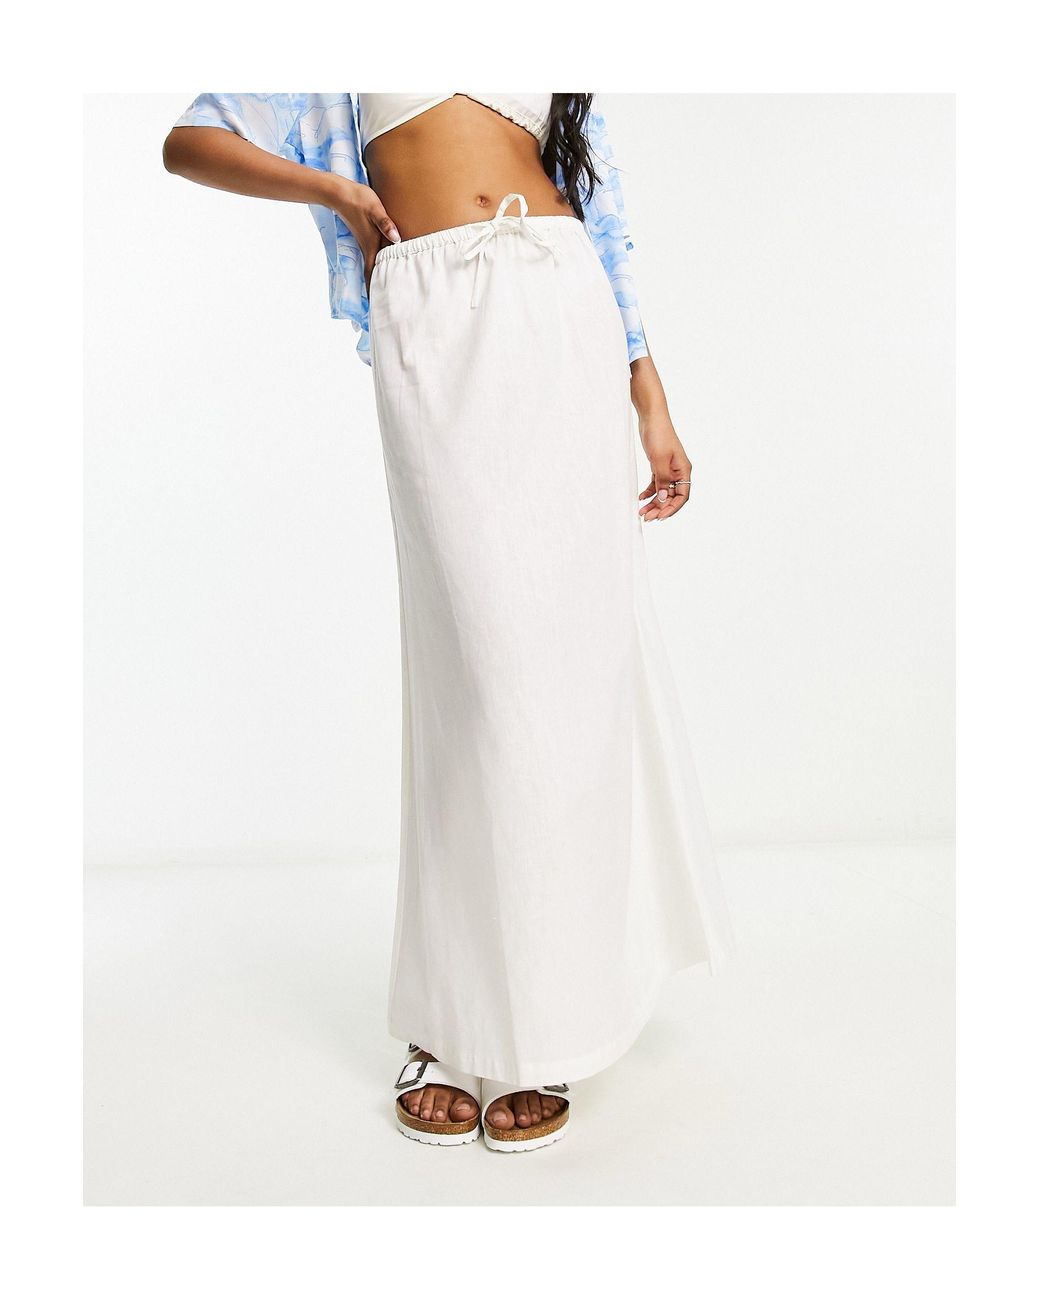 Collusion Low Rise Linen Beach Skirt in White | Lyst